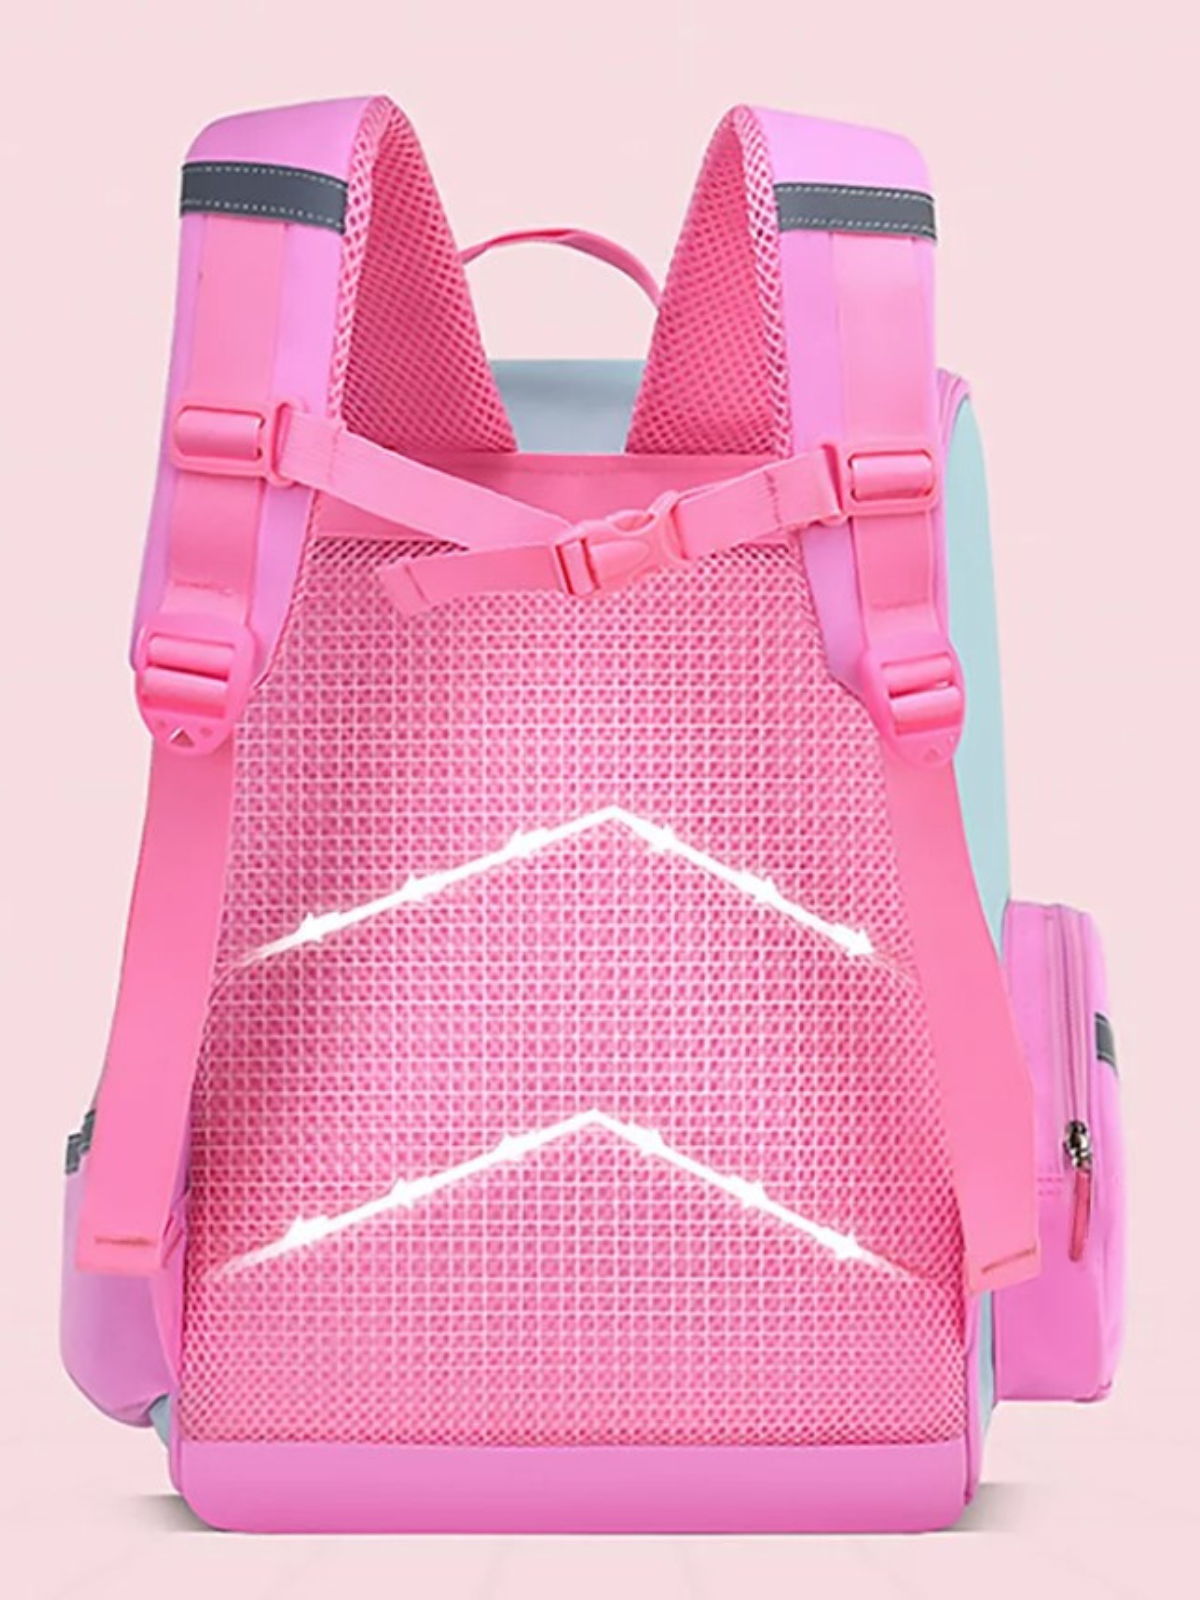 Back To School Accessories | Pink Unicorn Backpack | Mia Belle Girls